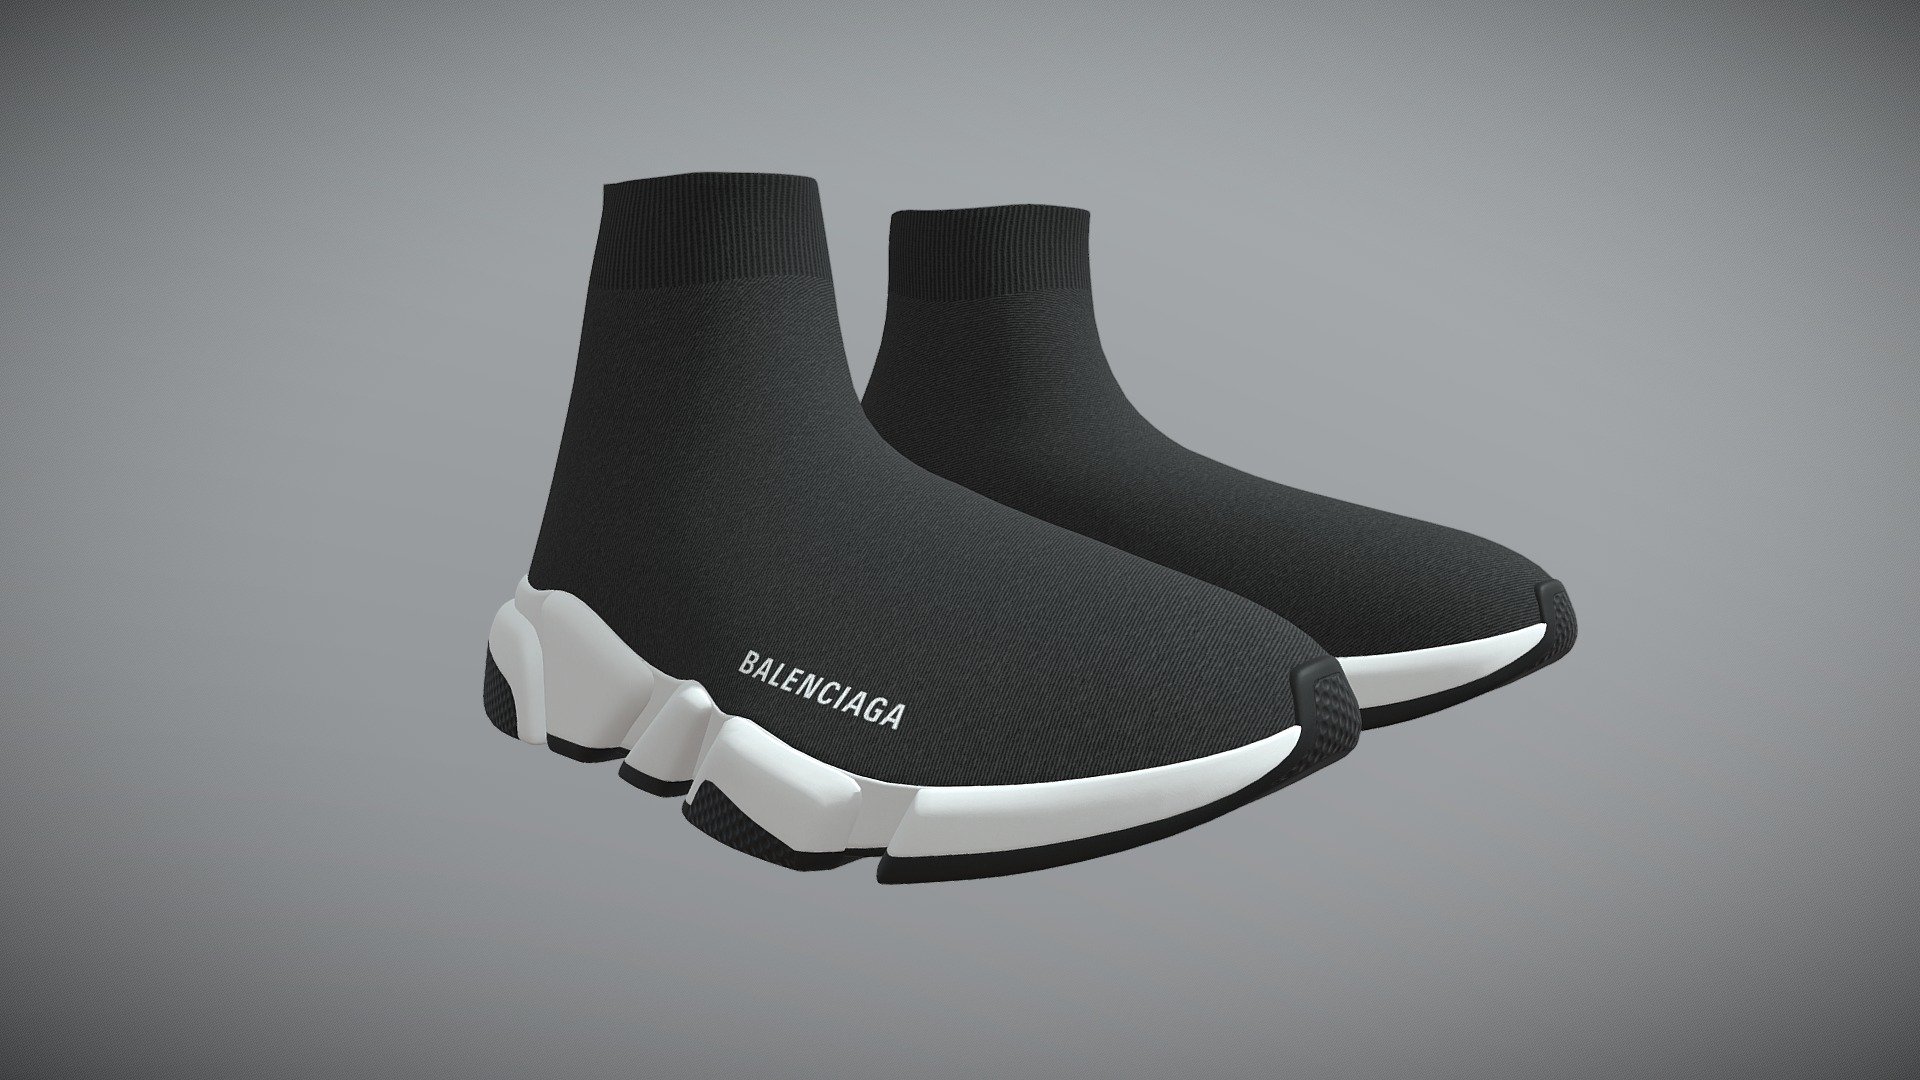 ** Balenciaga Speed sneakers**

Low Poly Materials: (PBR) Textures: 4096 x 4096 Unwrapped UVs:

Non-overlapping PBR: Diffuse Glossiness Specular Normal

Formats: 3ds Max 2018 (Vray ), 3ds Max 2018(Corona), Fbx ,Stl

Shoes with High-Quality Fits perfect for any engine and game

Made in Italy - Balenciaga Speed LT sneakers Low-poly 3D model - 3D model by CGMONDO 3d model